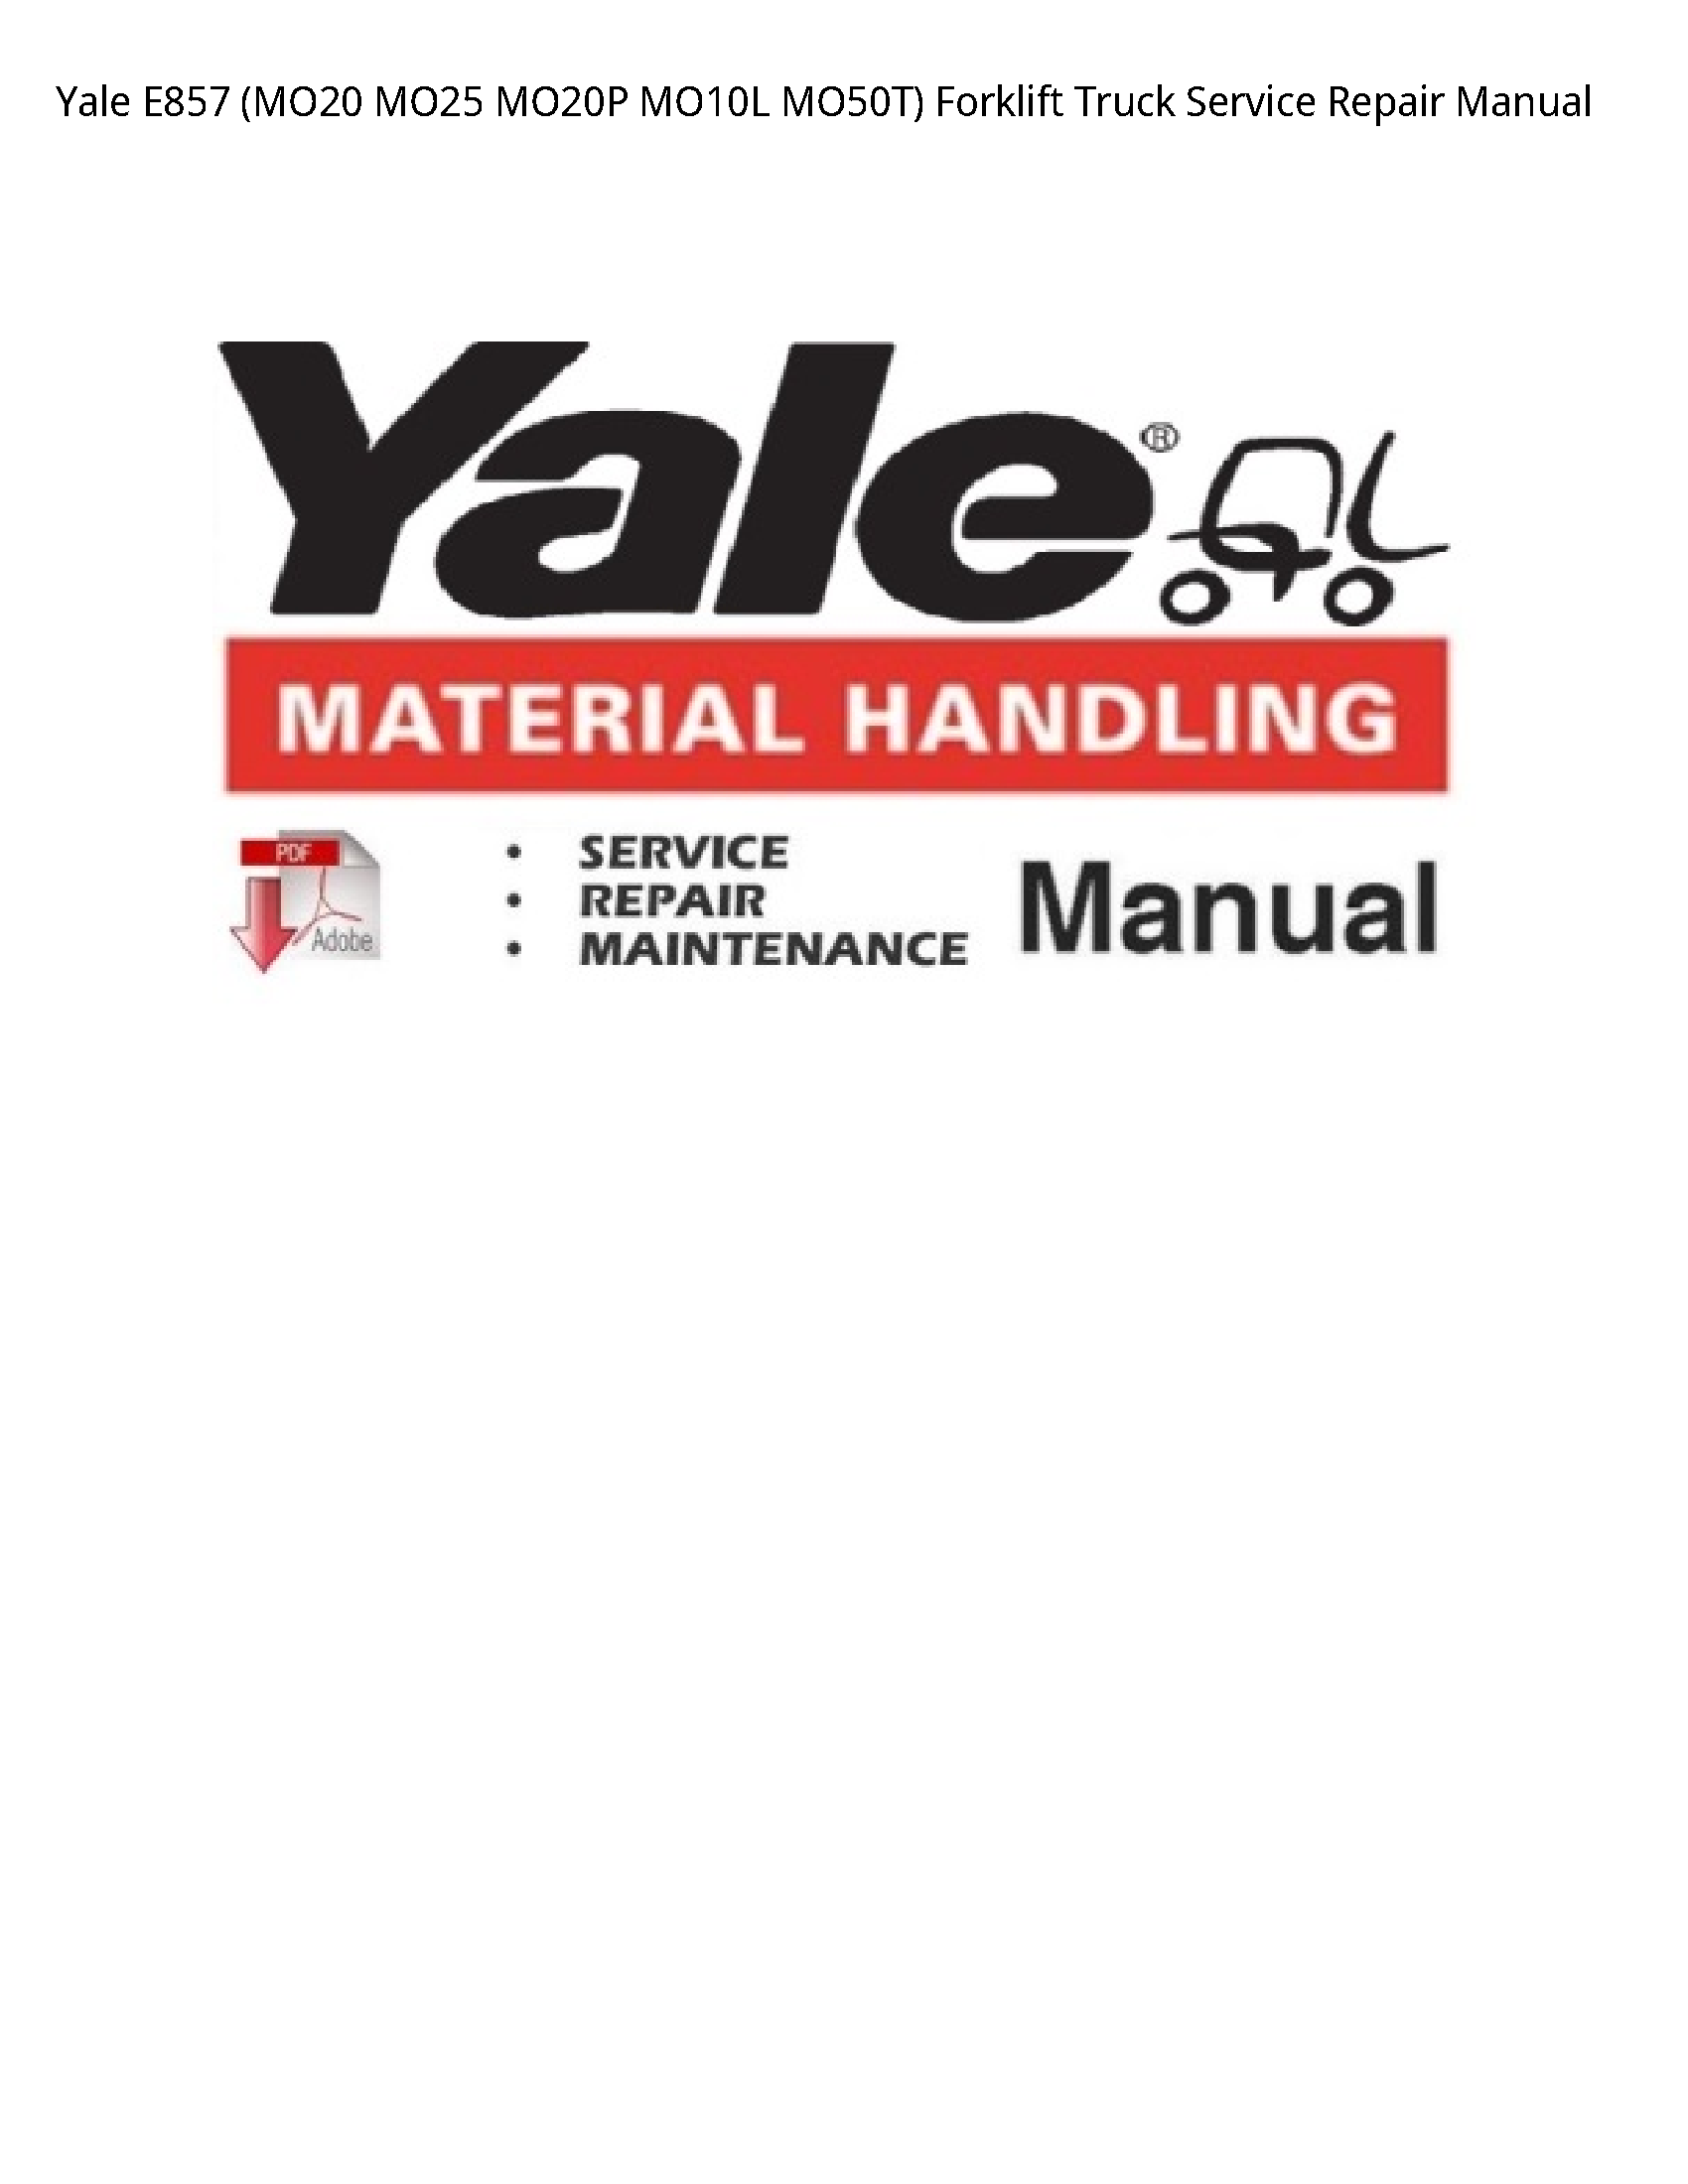 Yale E857 Forklift Truck manual